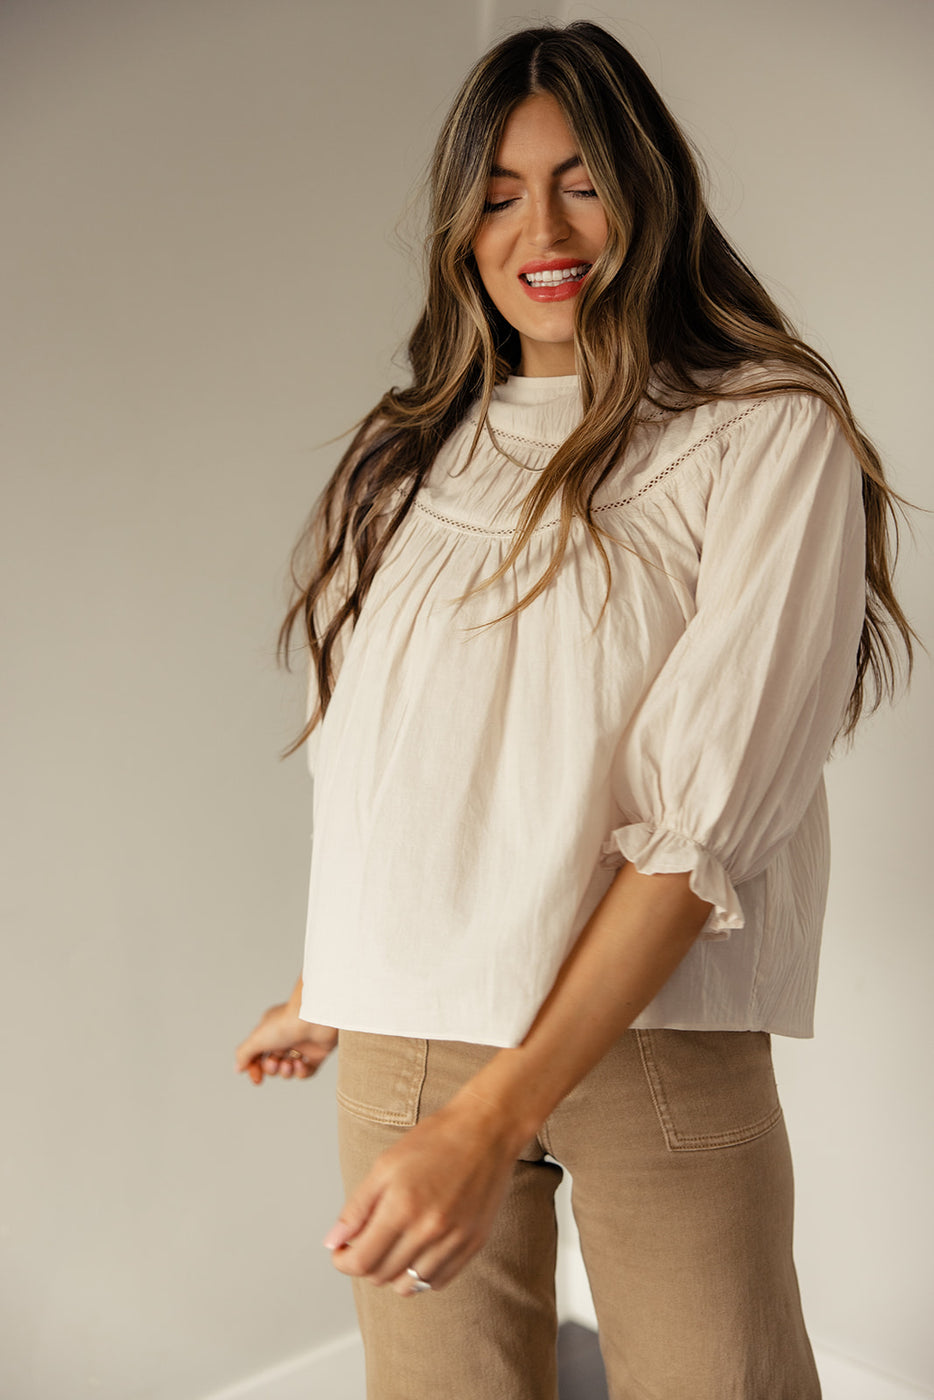 a woman with long hair wearing a white shirt and brown pants